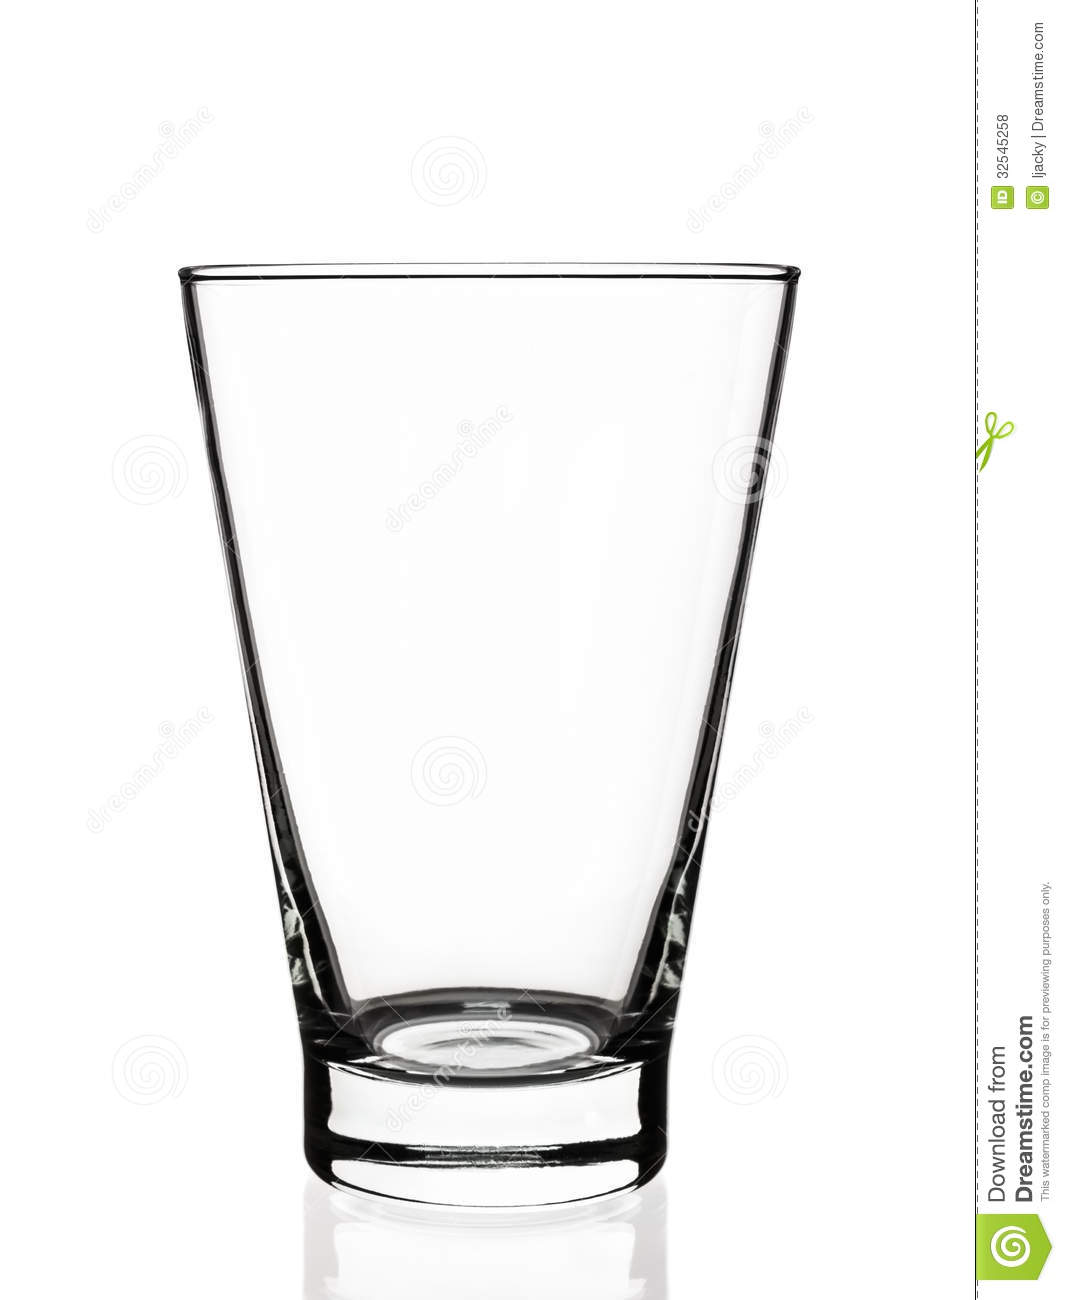 Empty glass clipart black and white